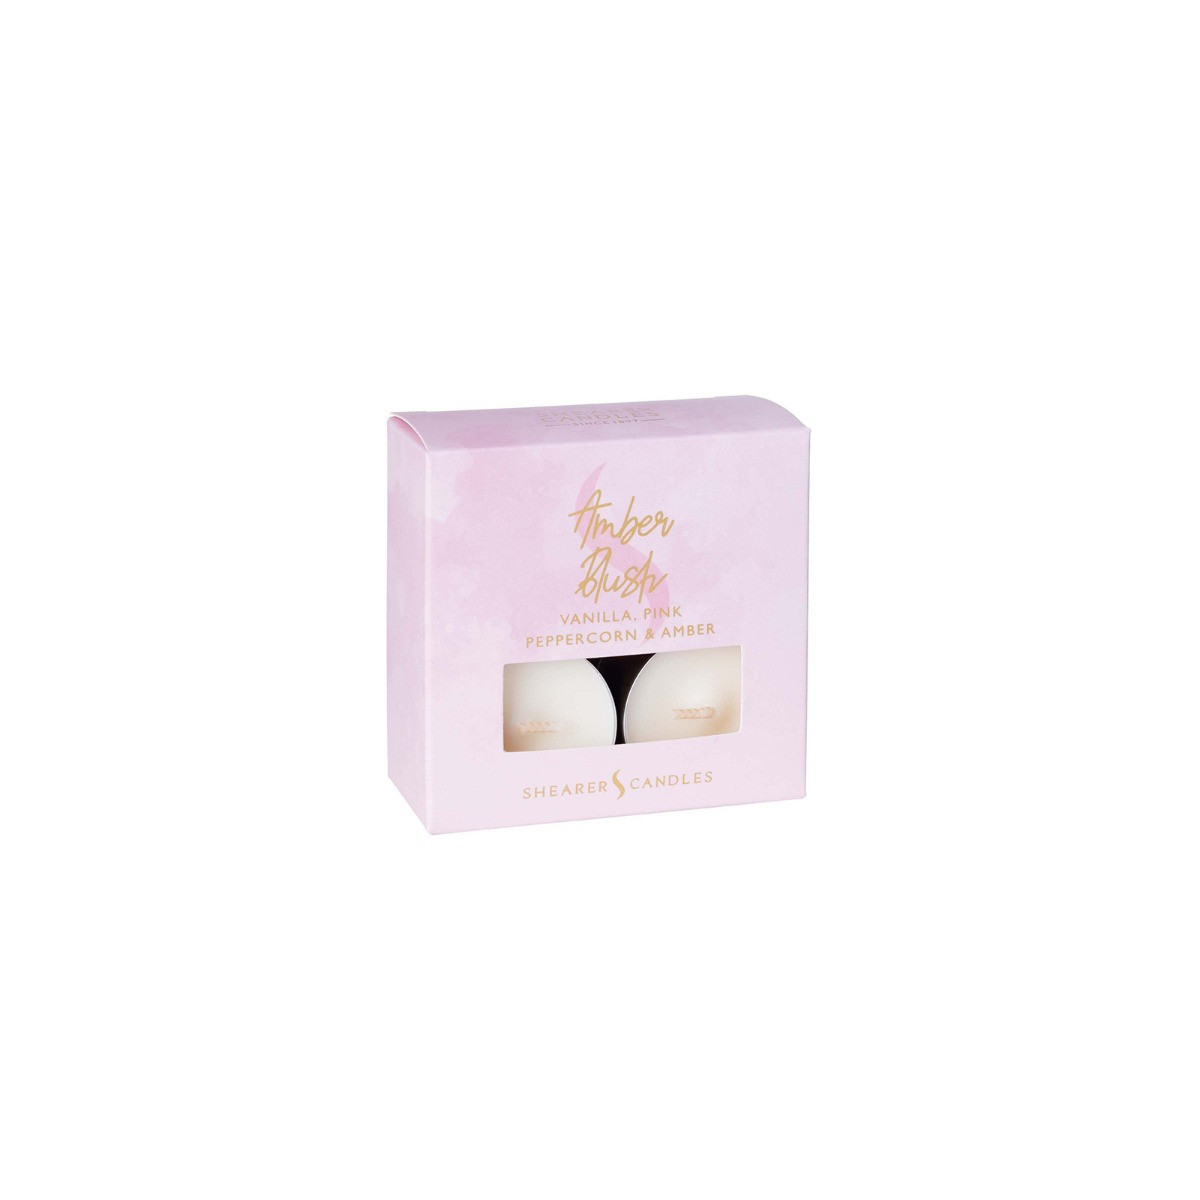 Shearer Candles Pack of 8 Tealights - Amber Blush>